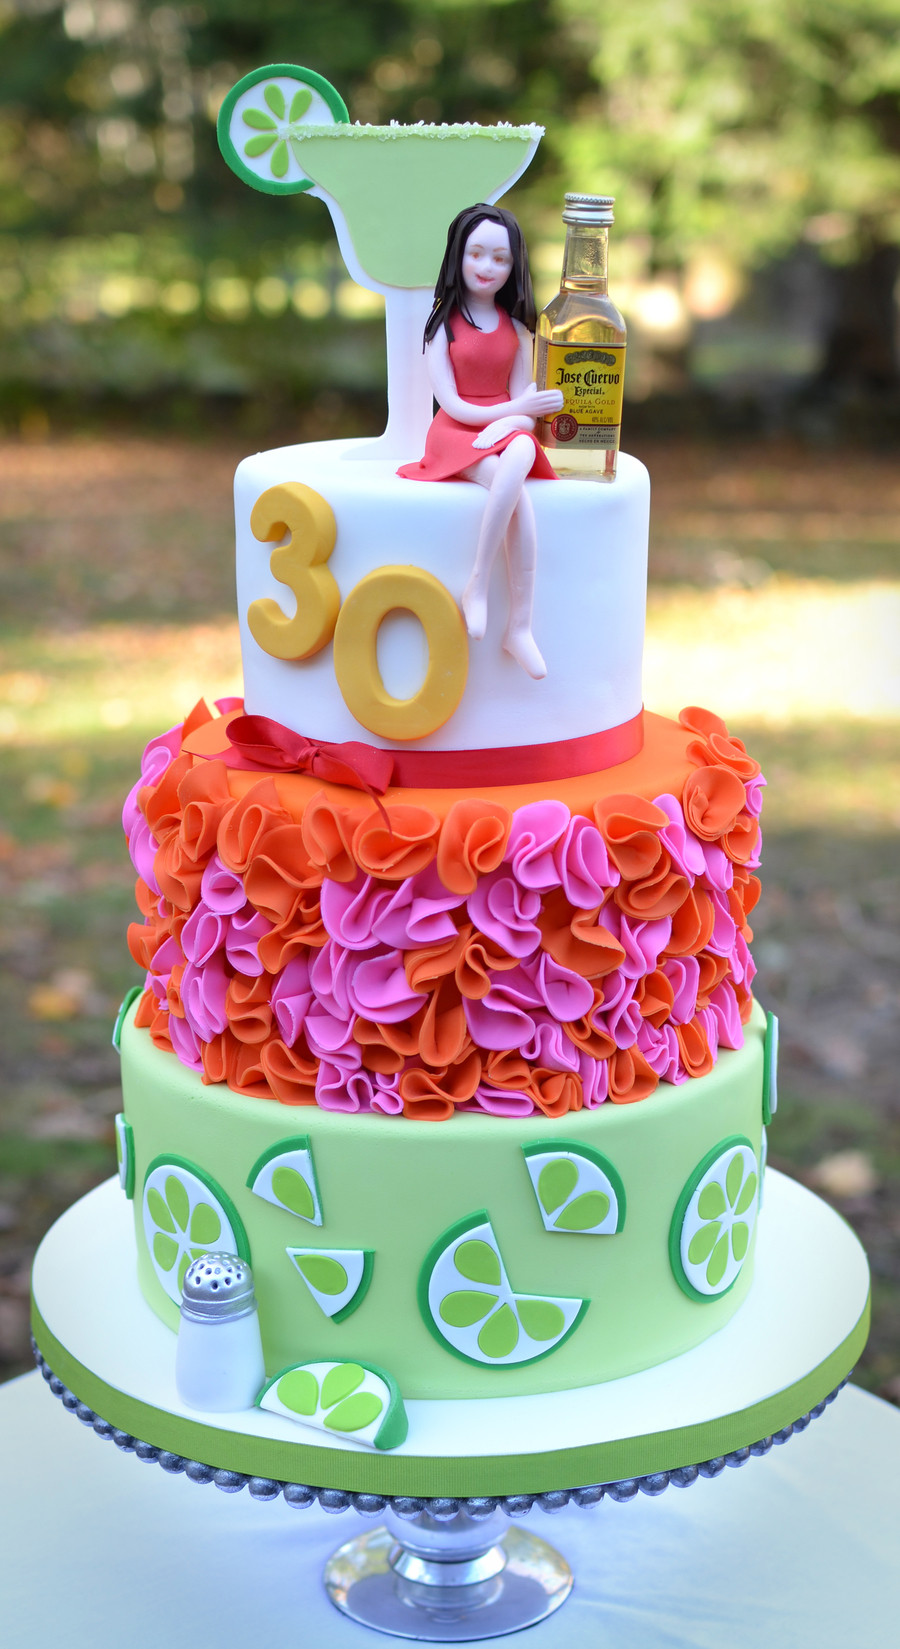 30th Birthday Cakes For Her
 Margarita And Tequila Themed 30Th Birthday Cake